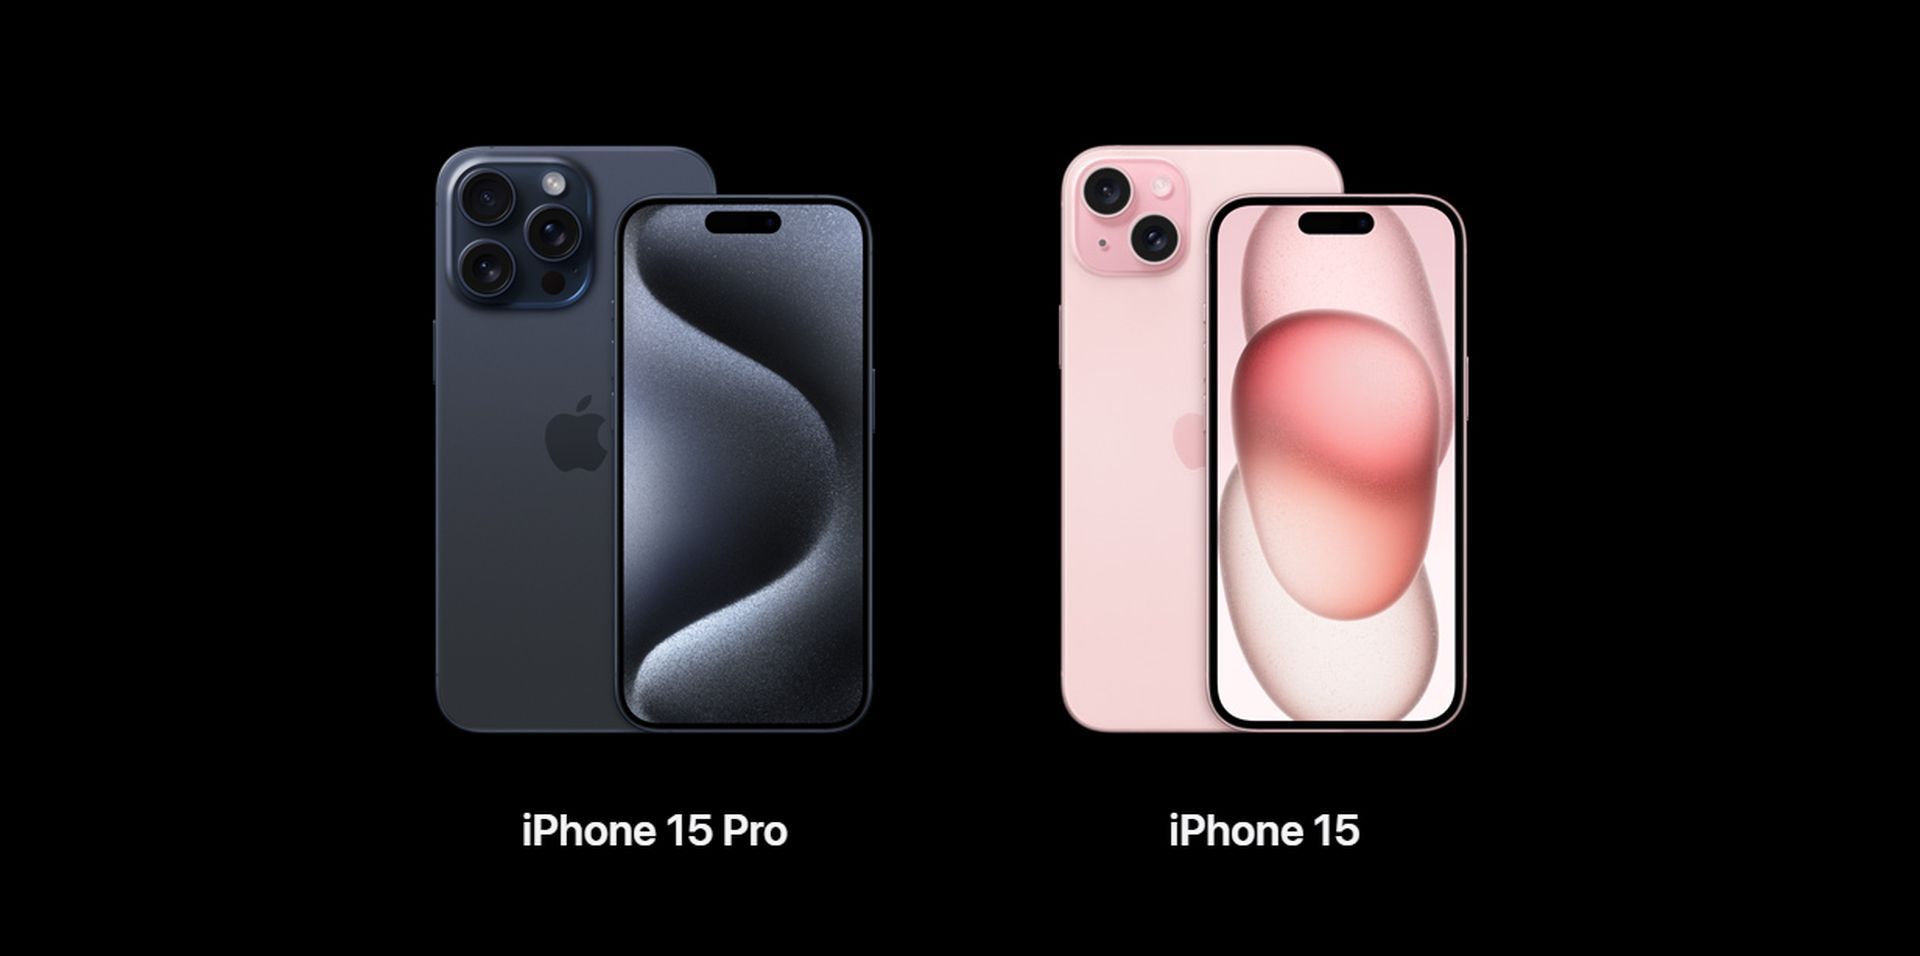 New iPhone colors